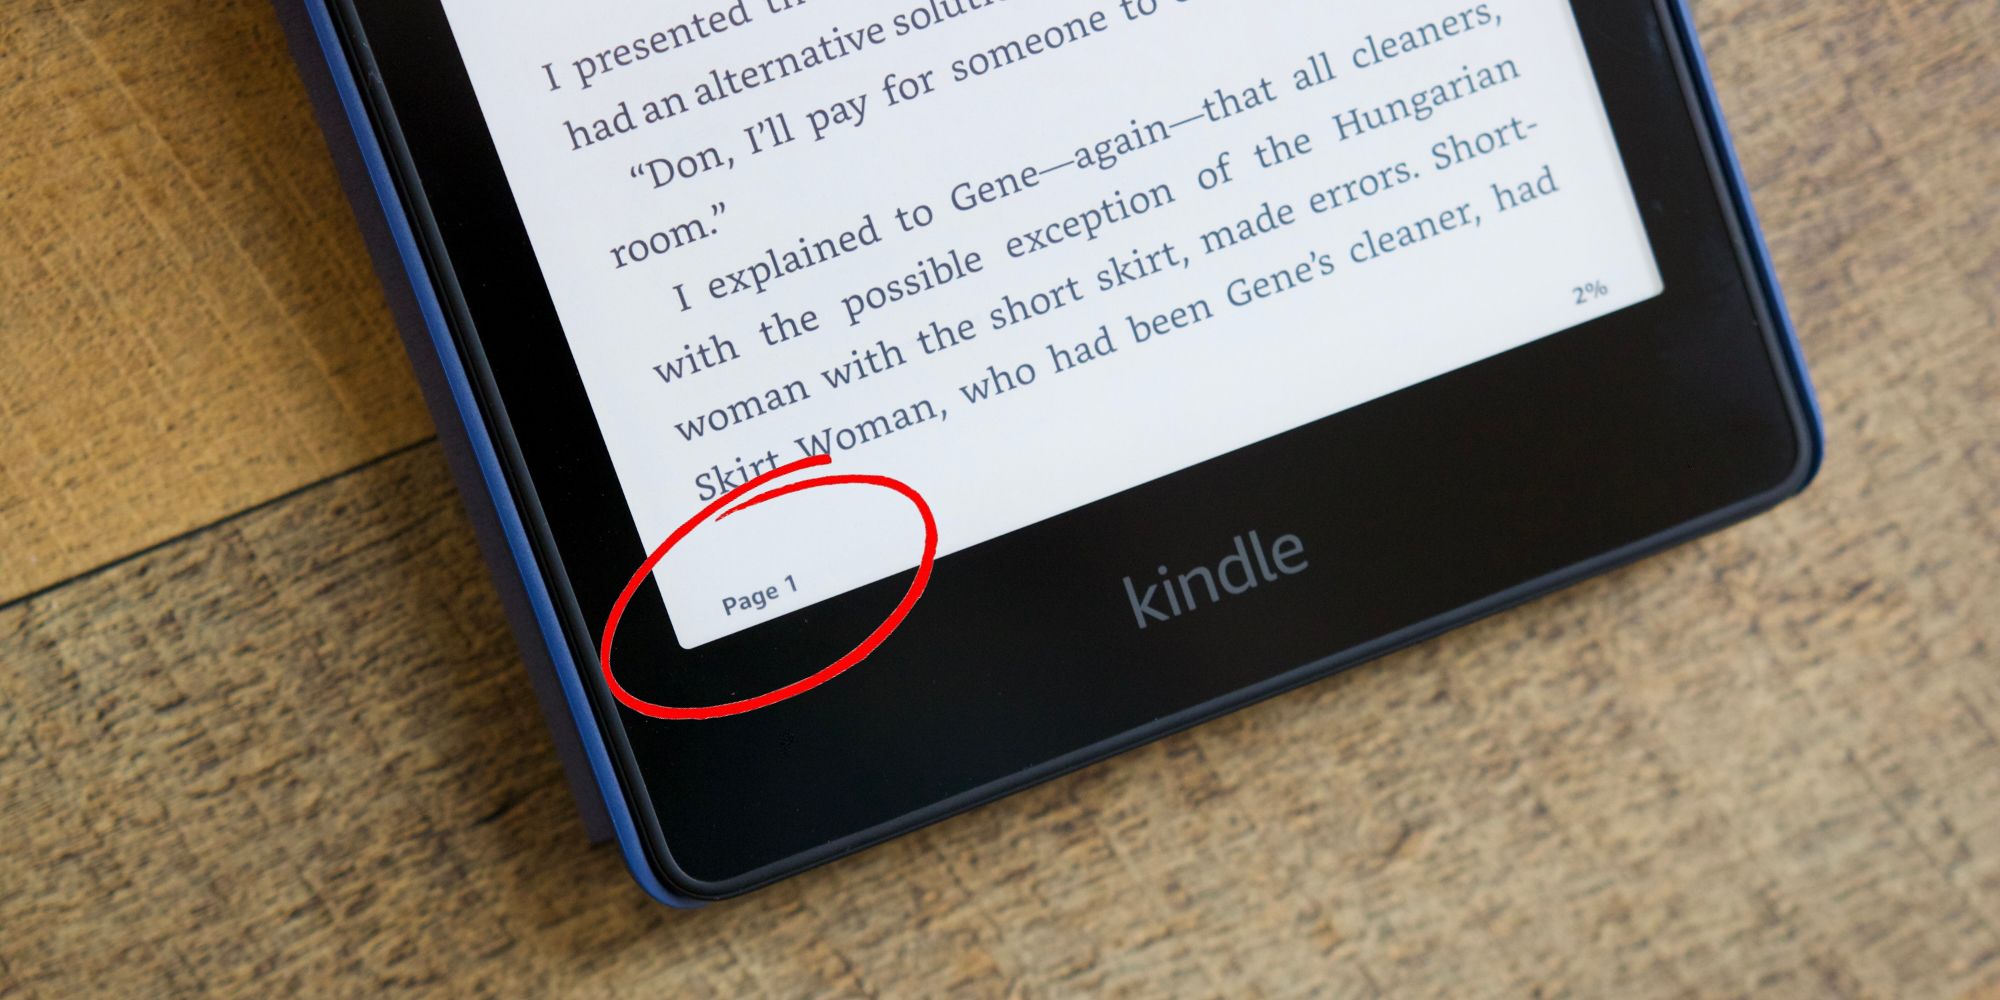 kindle app page numbers instead of location